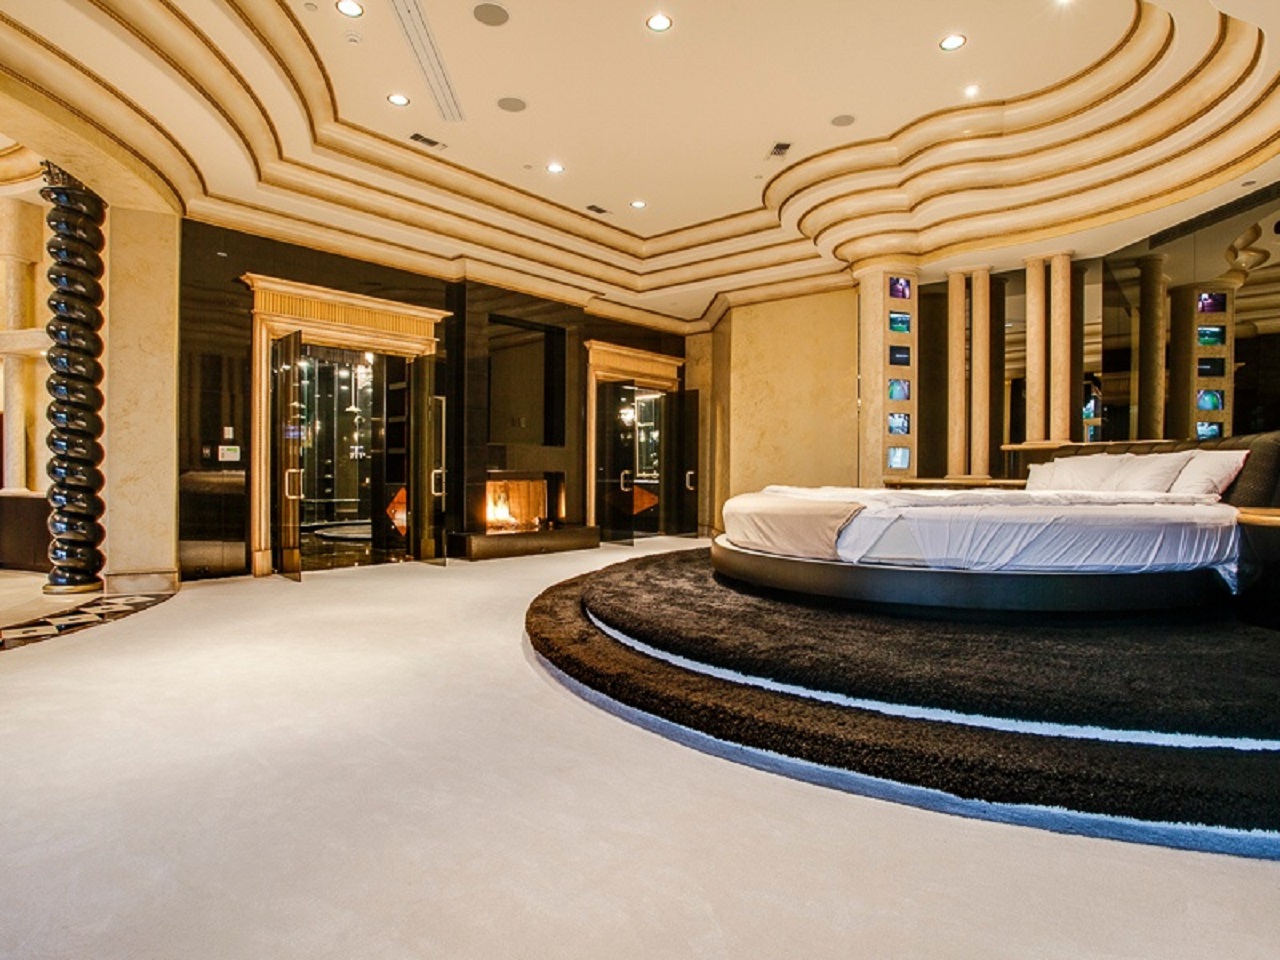 15 Luxurious Master Bedrooms With Round Beds - Interior ...
